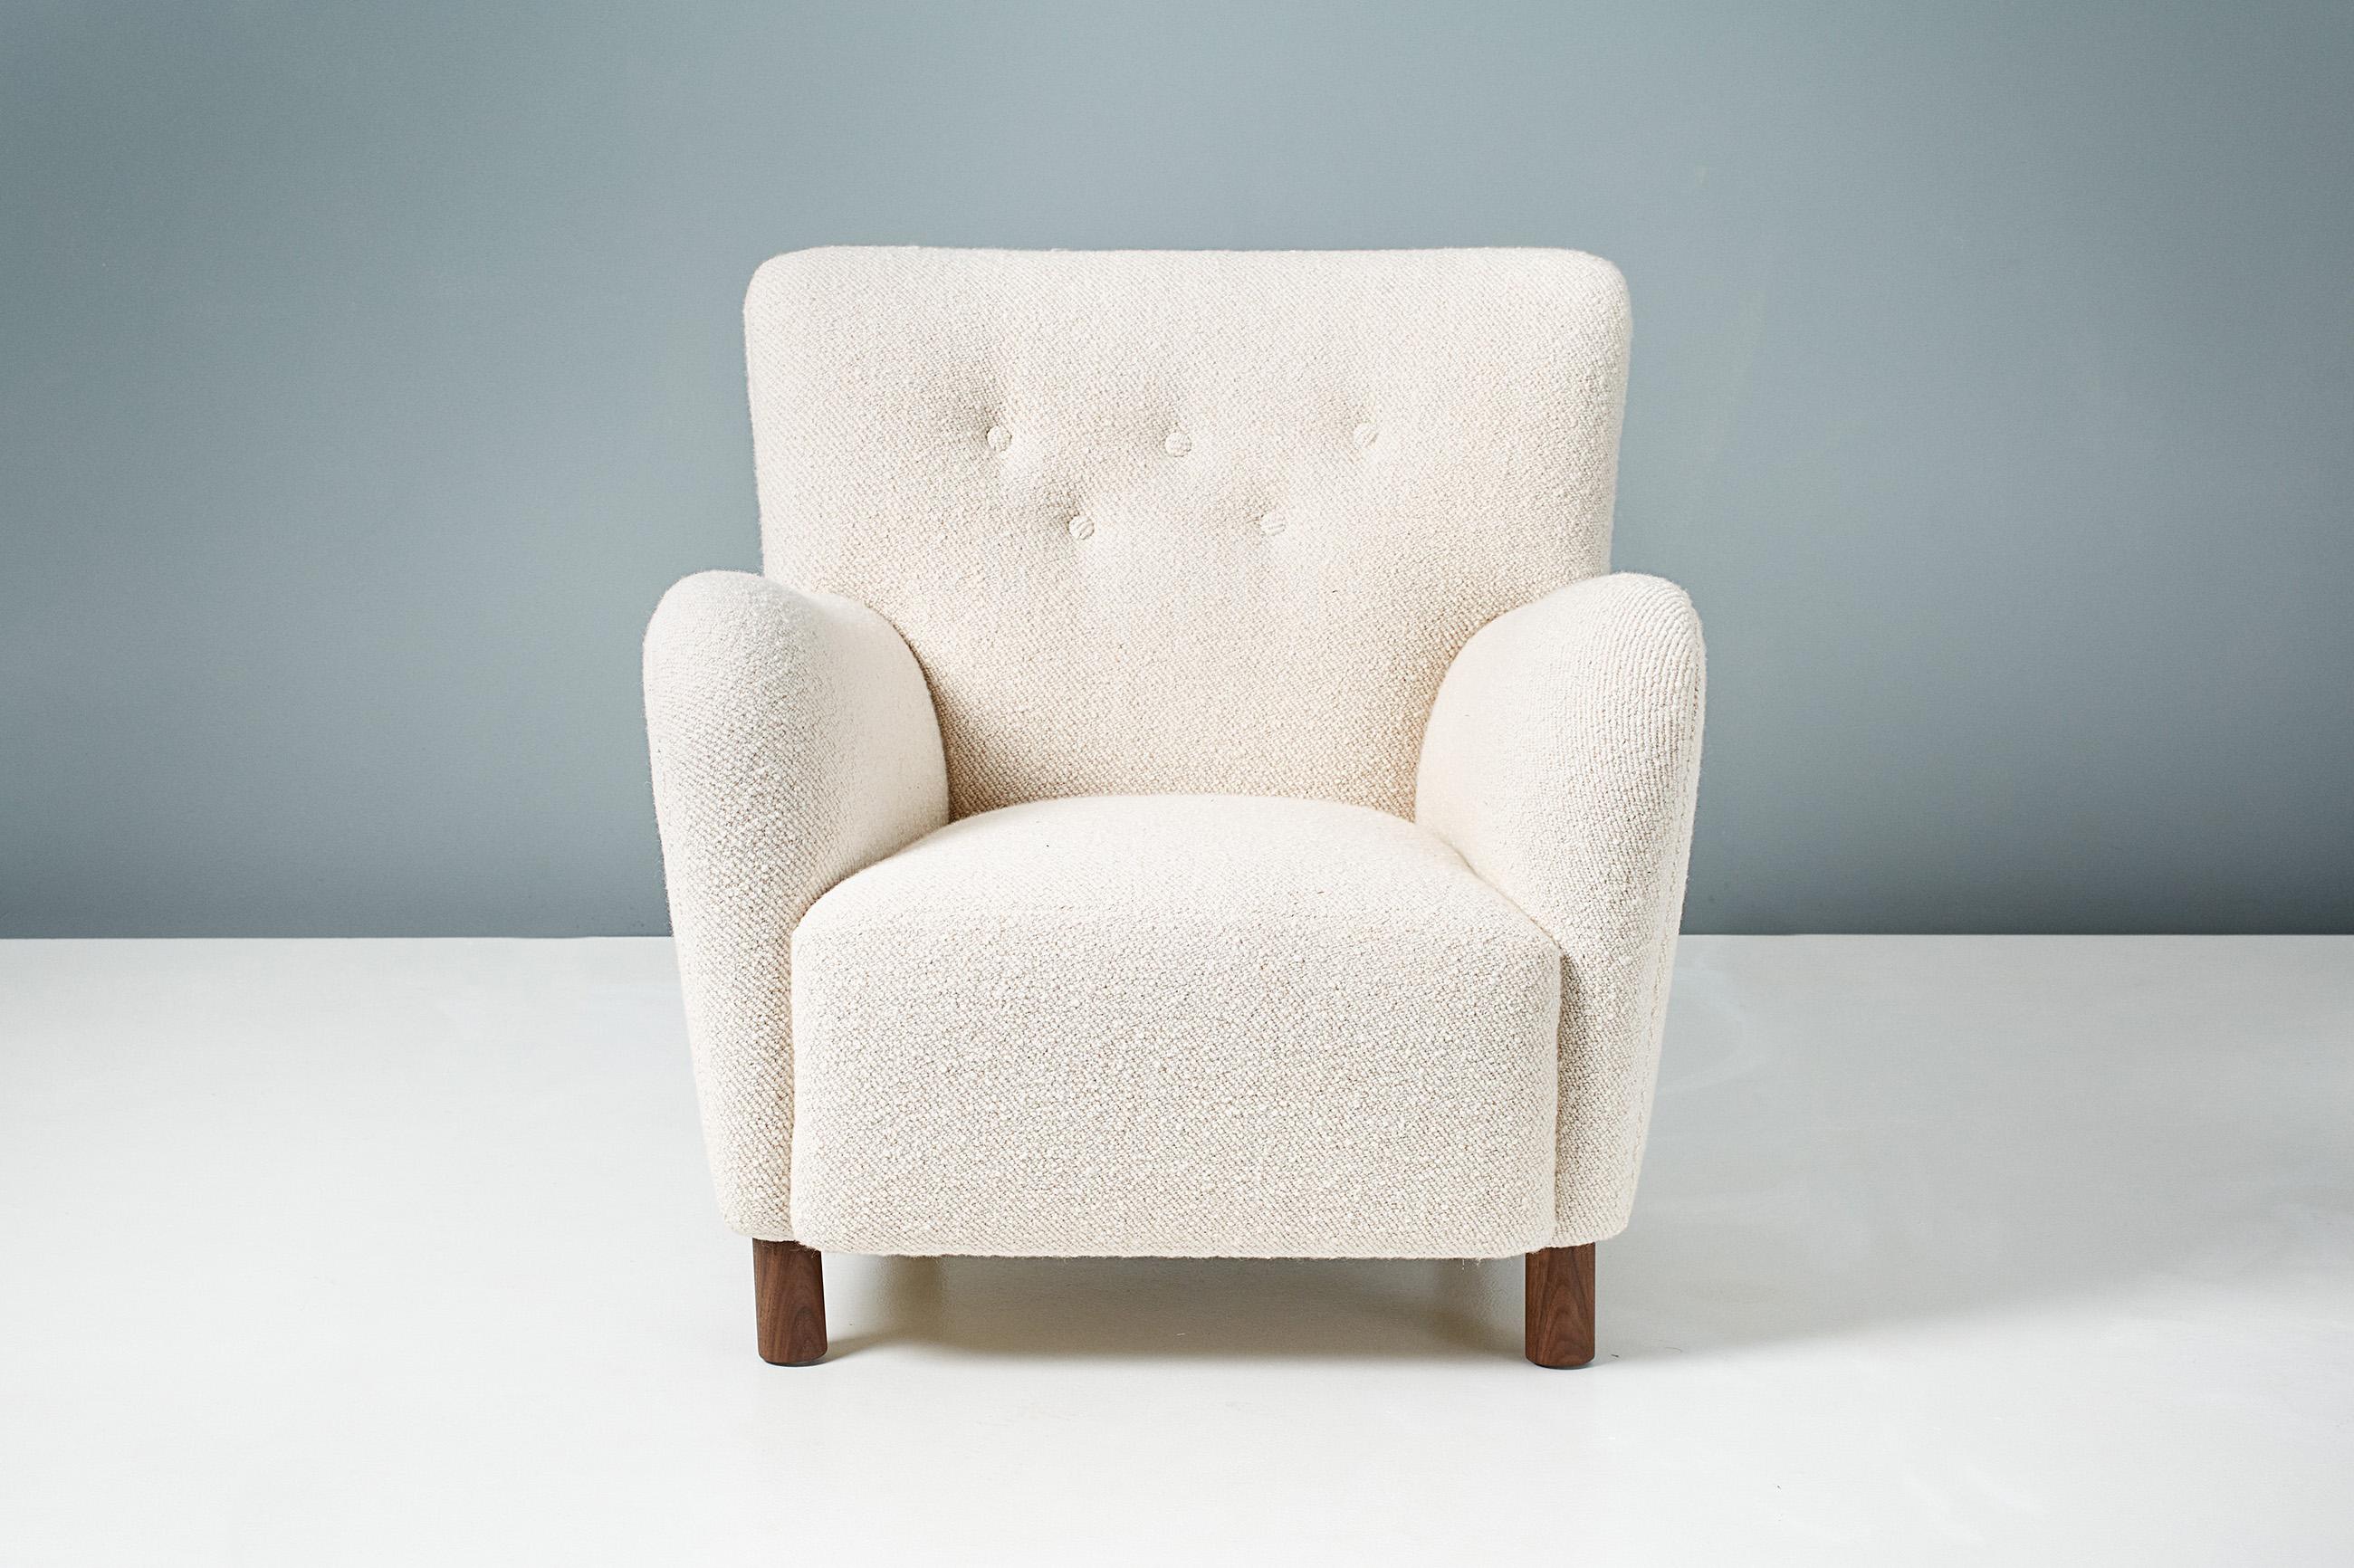 Dagmar design

Model 54 Lounge Chair

A custom made lounge chair developed and produced at our workshops in London using the highest quality materials. This chair is upholstered in Dedar, A Joy - Natural (wool). The 54 chair is available to